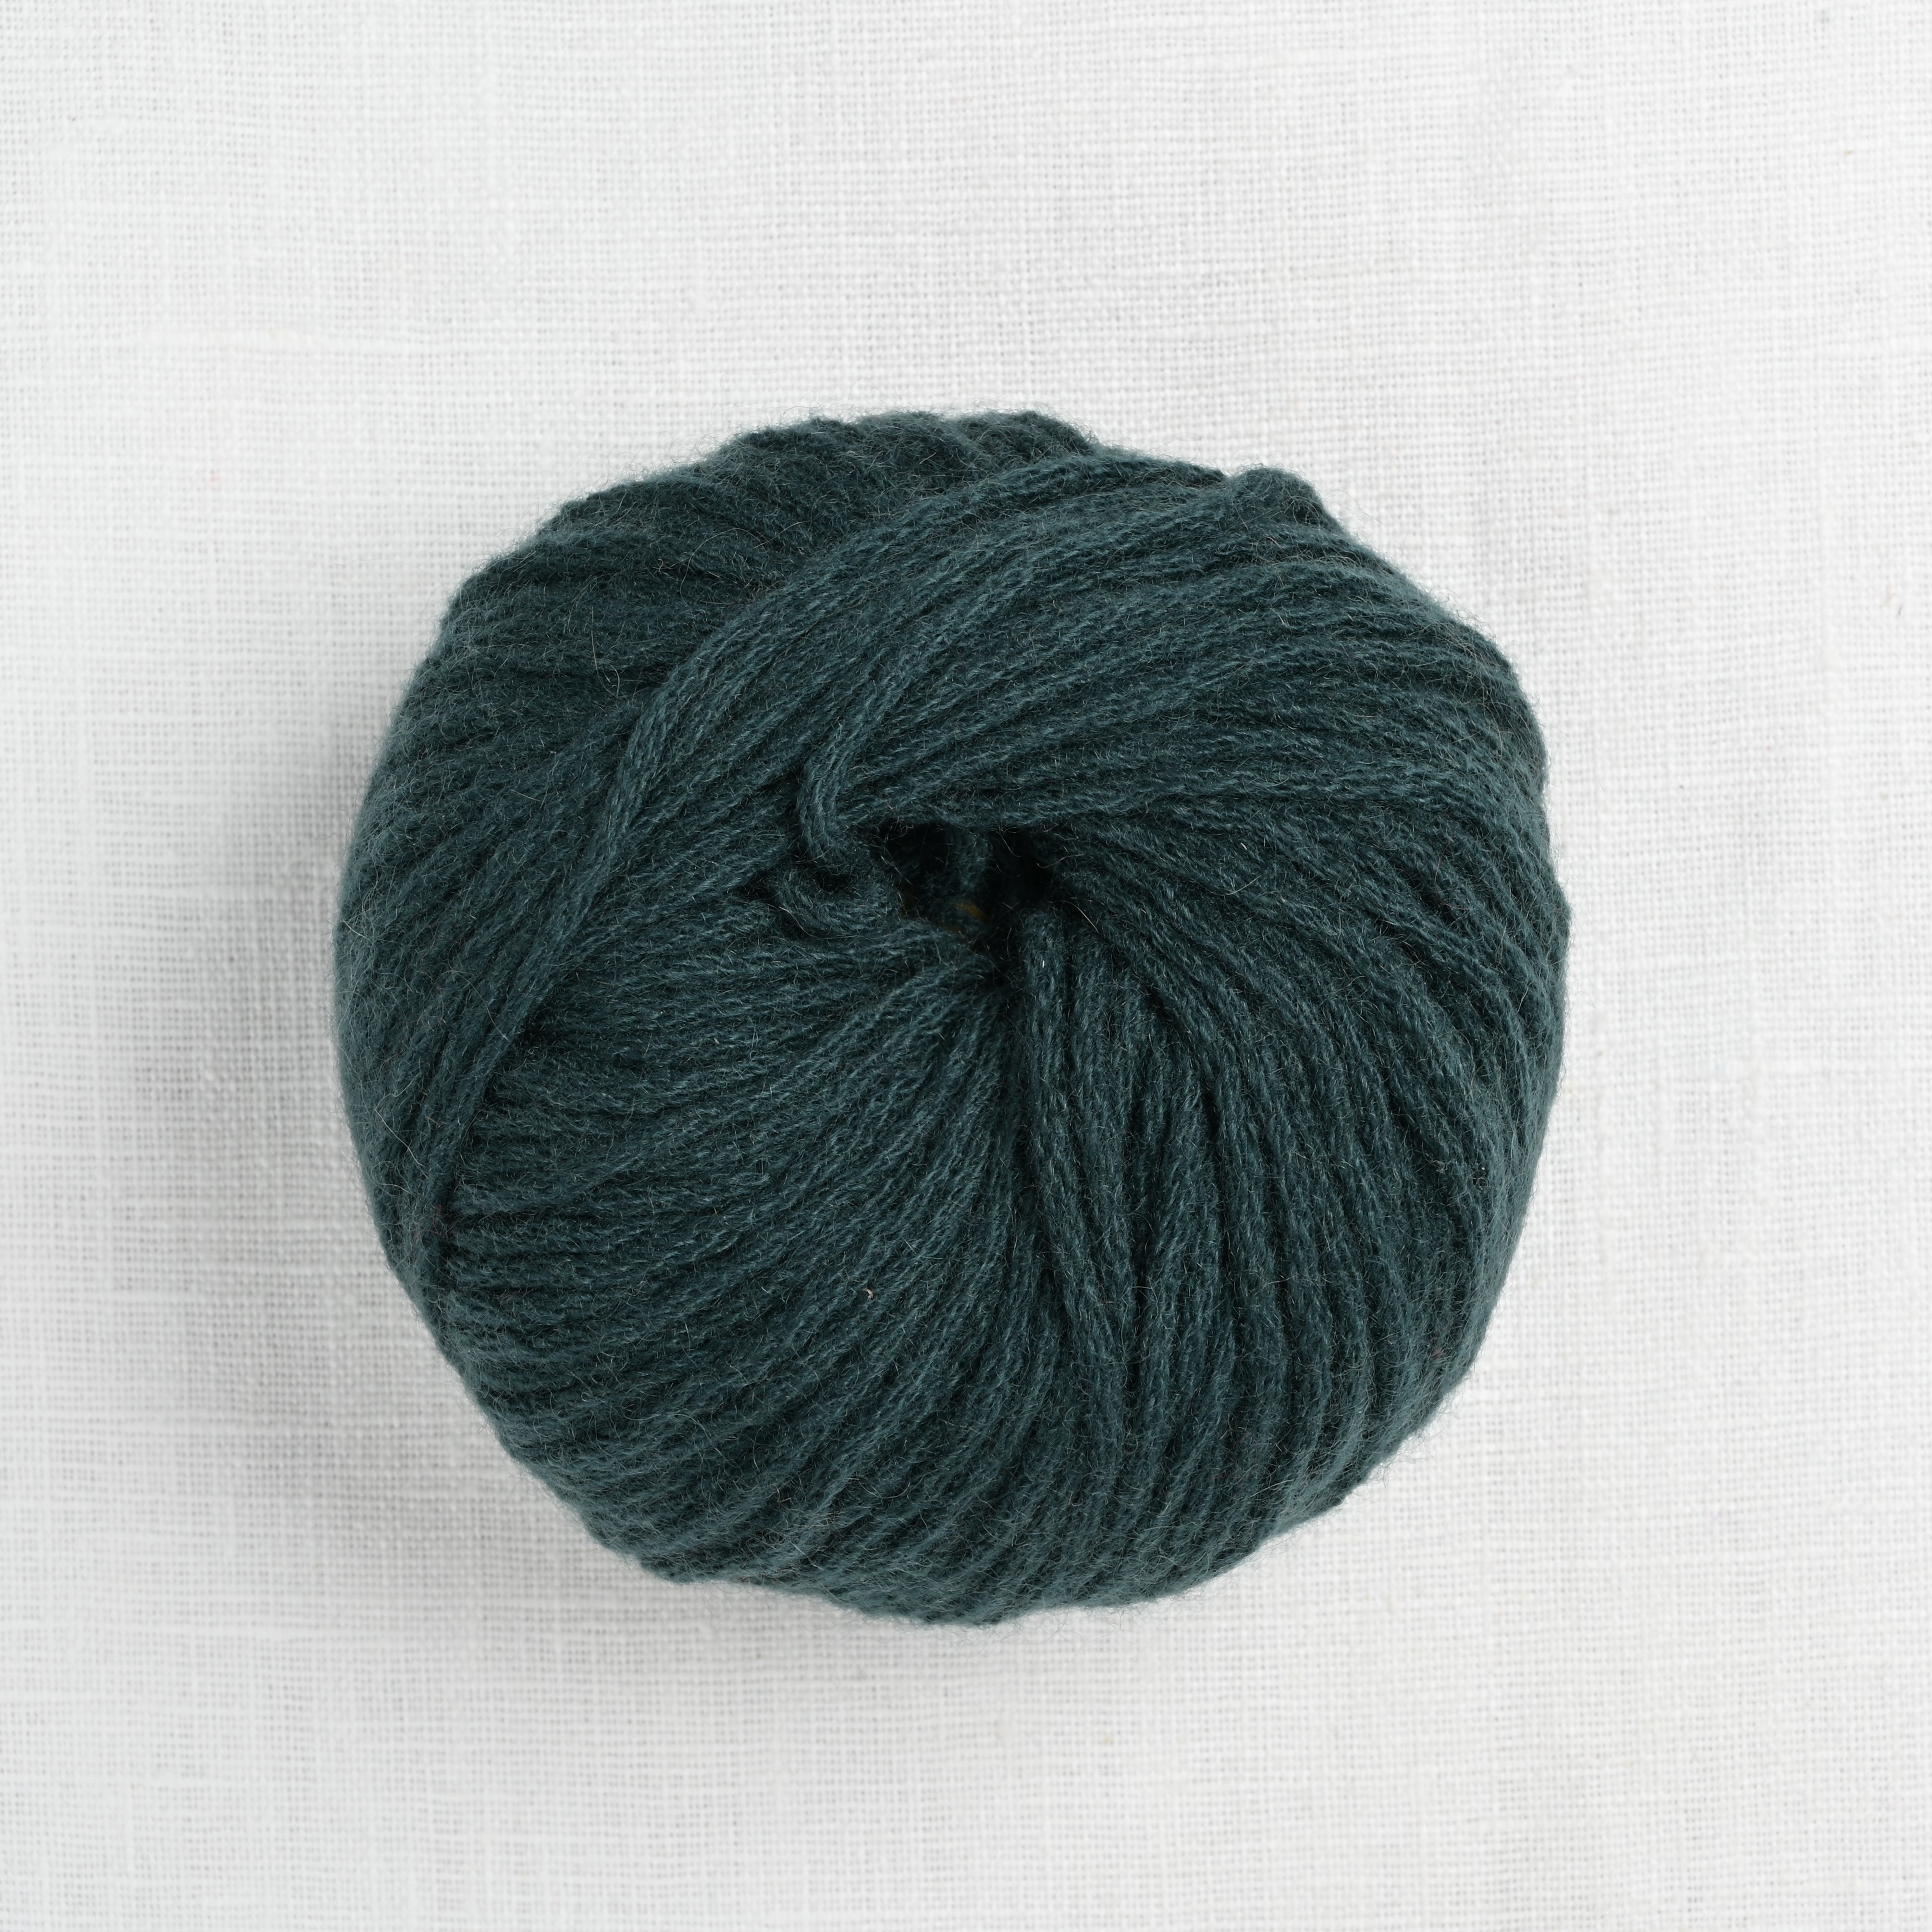 ORGANIC CASHMERE WORSTED, 100% Cashmere Wool, Knitting, Crocheting